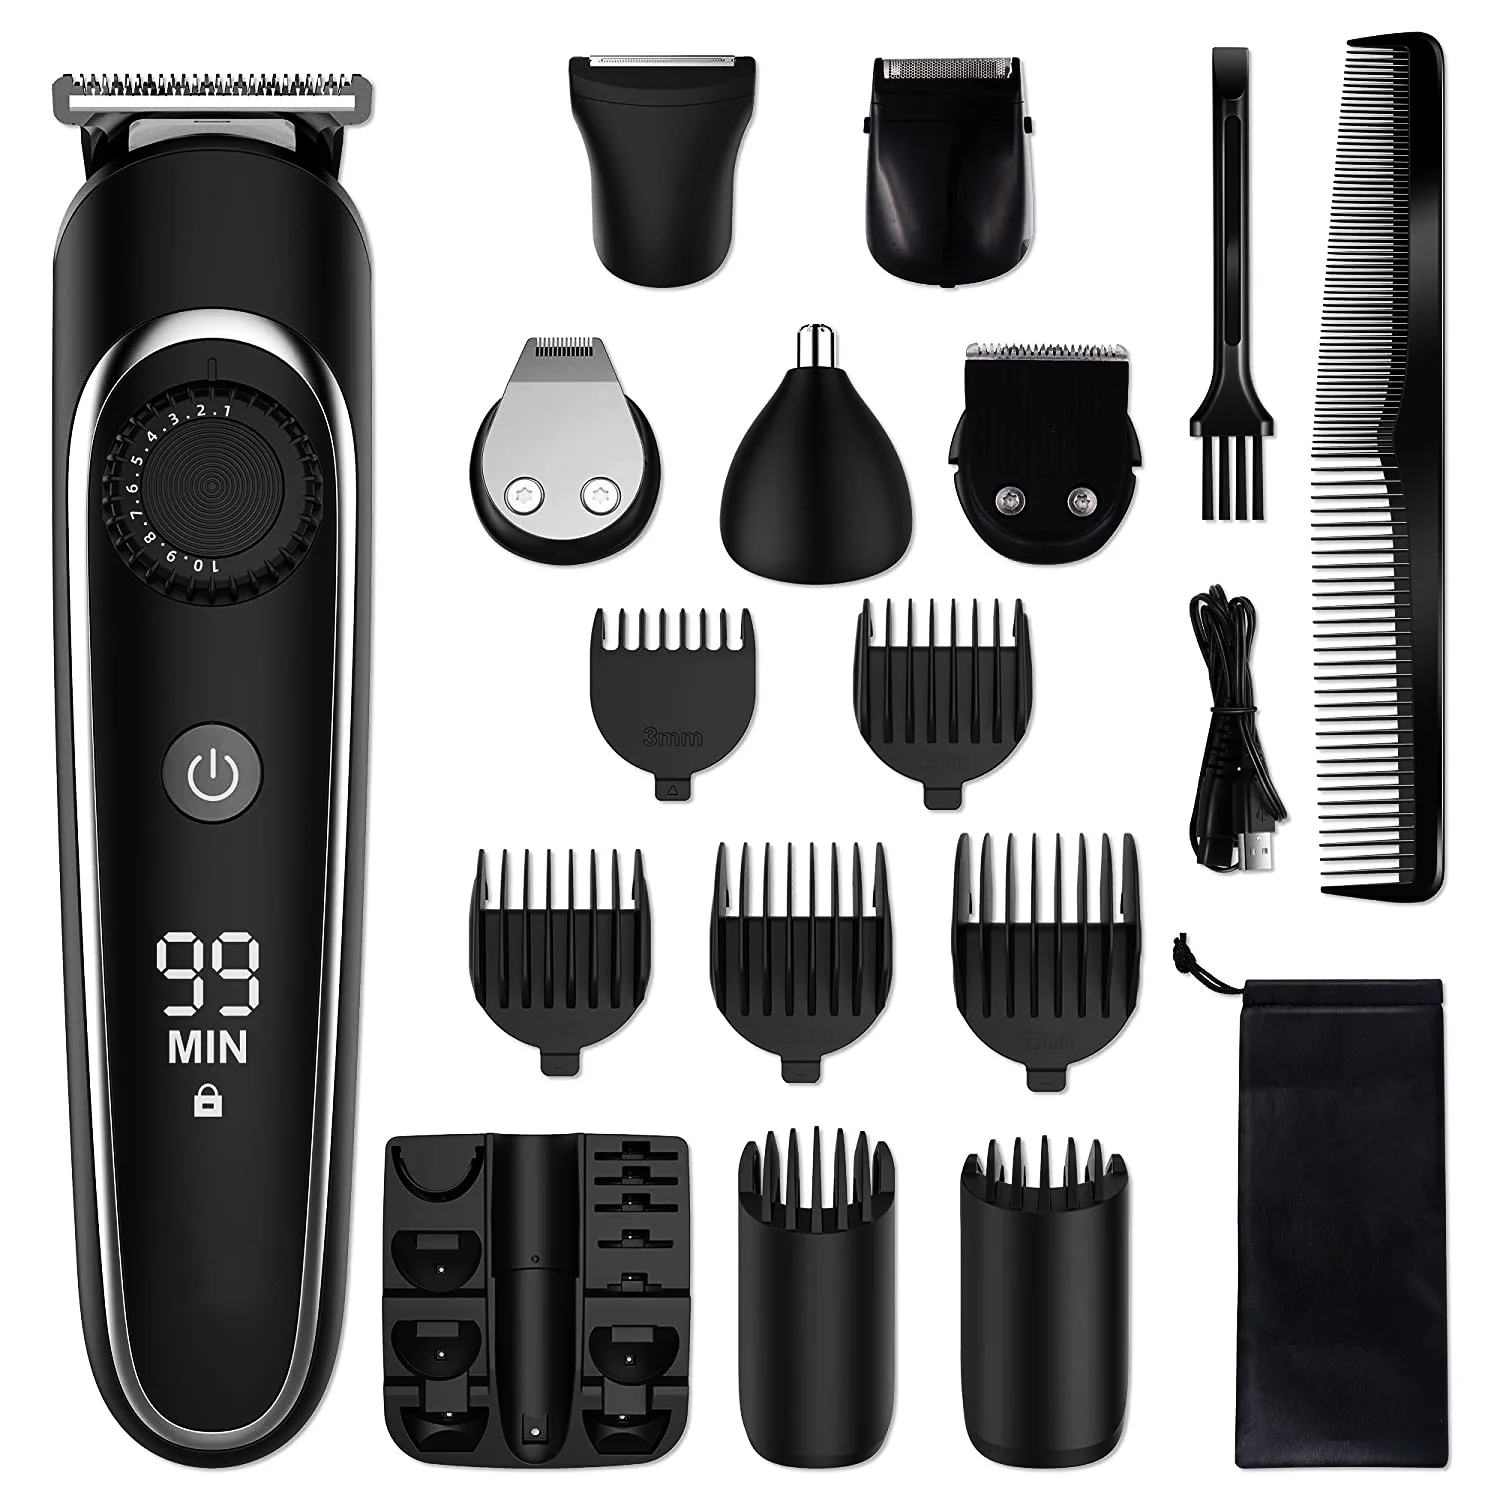 

All In One Hair Trimmer For Men Beard Grooming Kit Electric Shaver Body Groomer Hair Clipper Facial Nose Ear Trimmer Washable